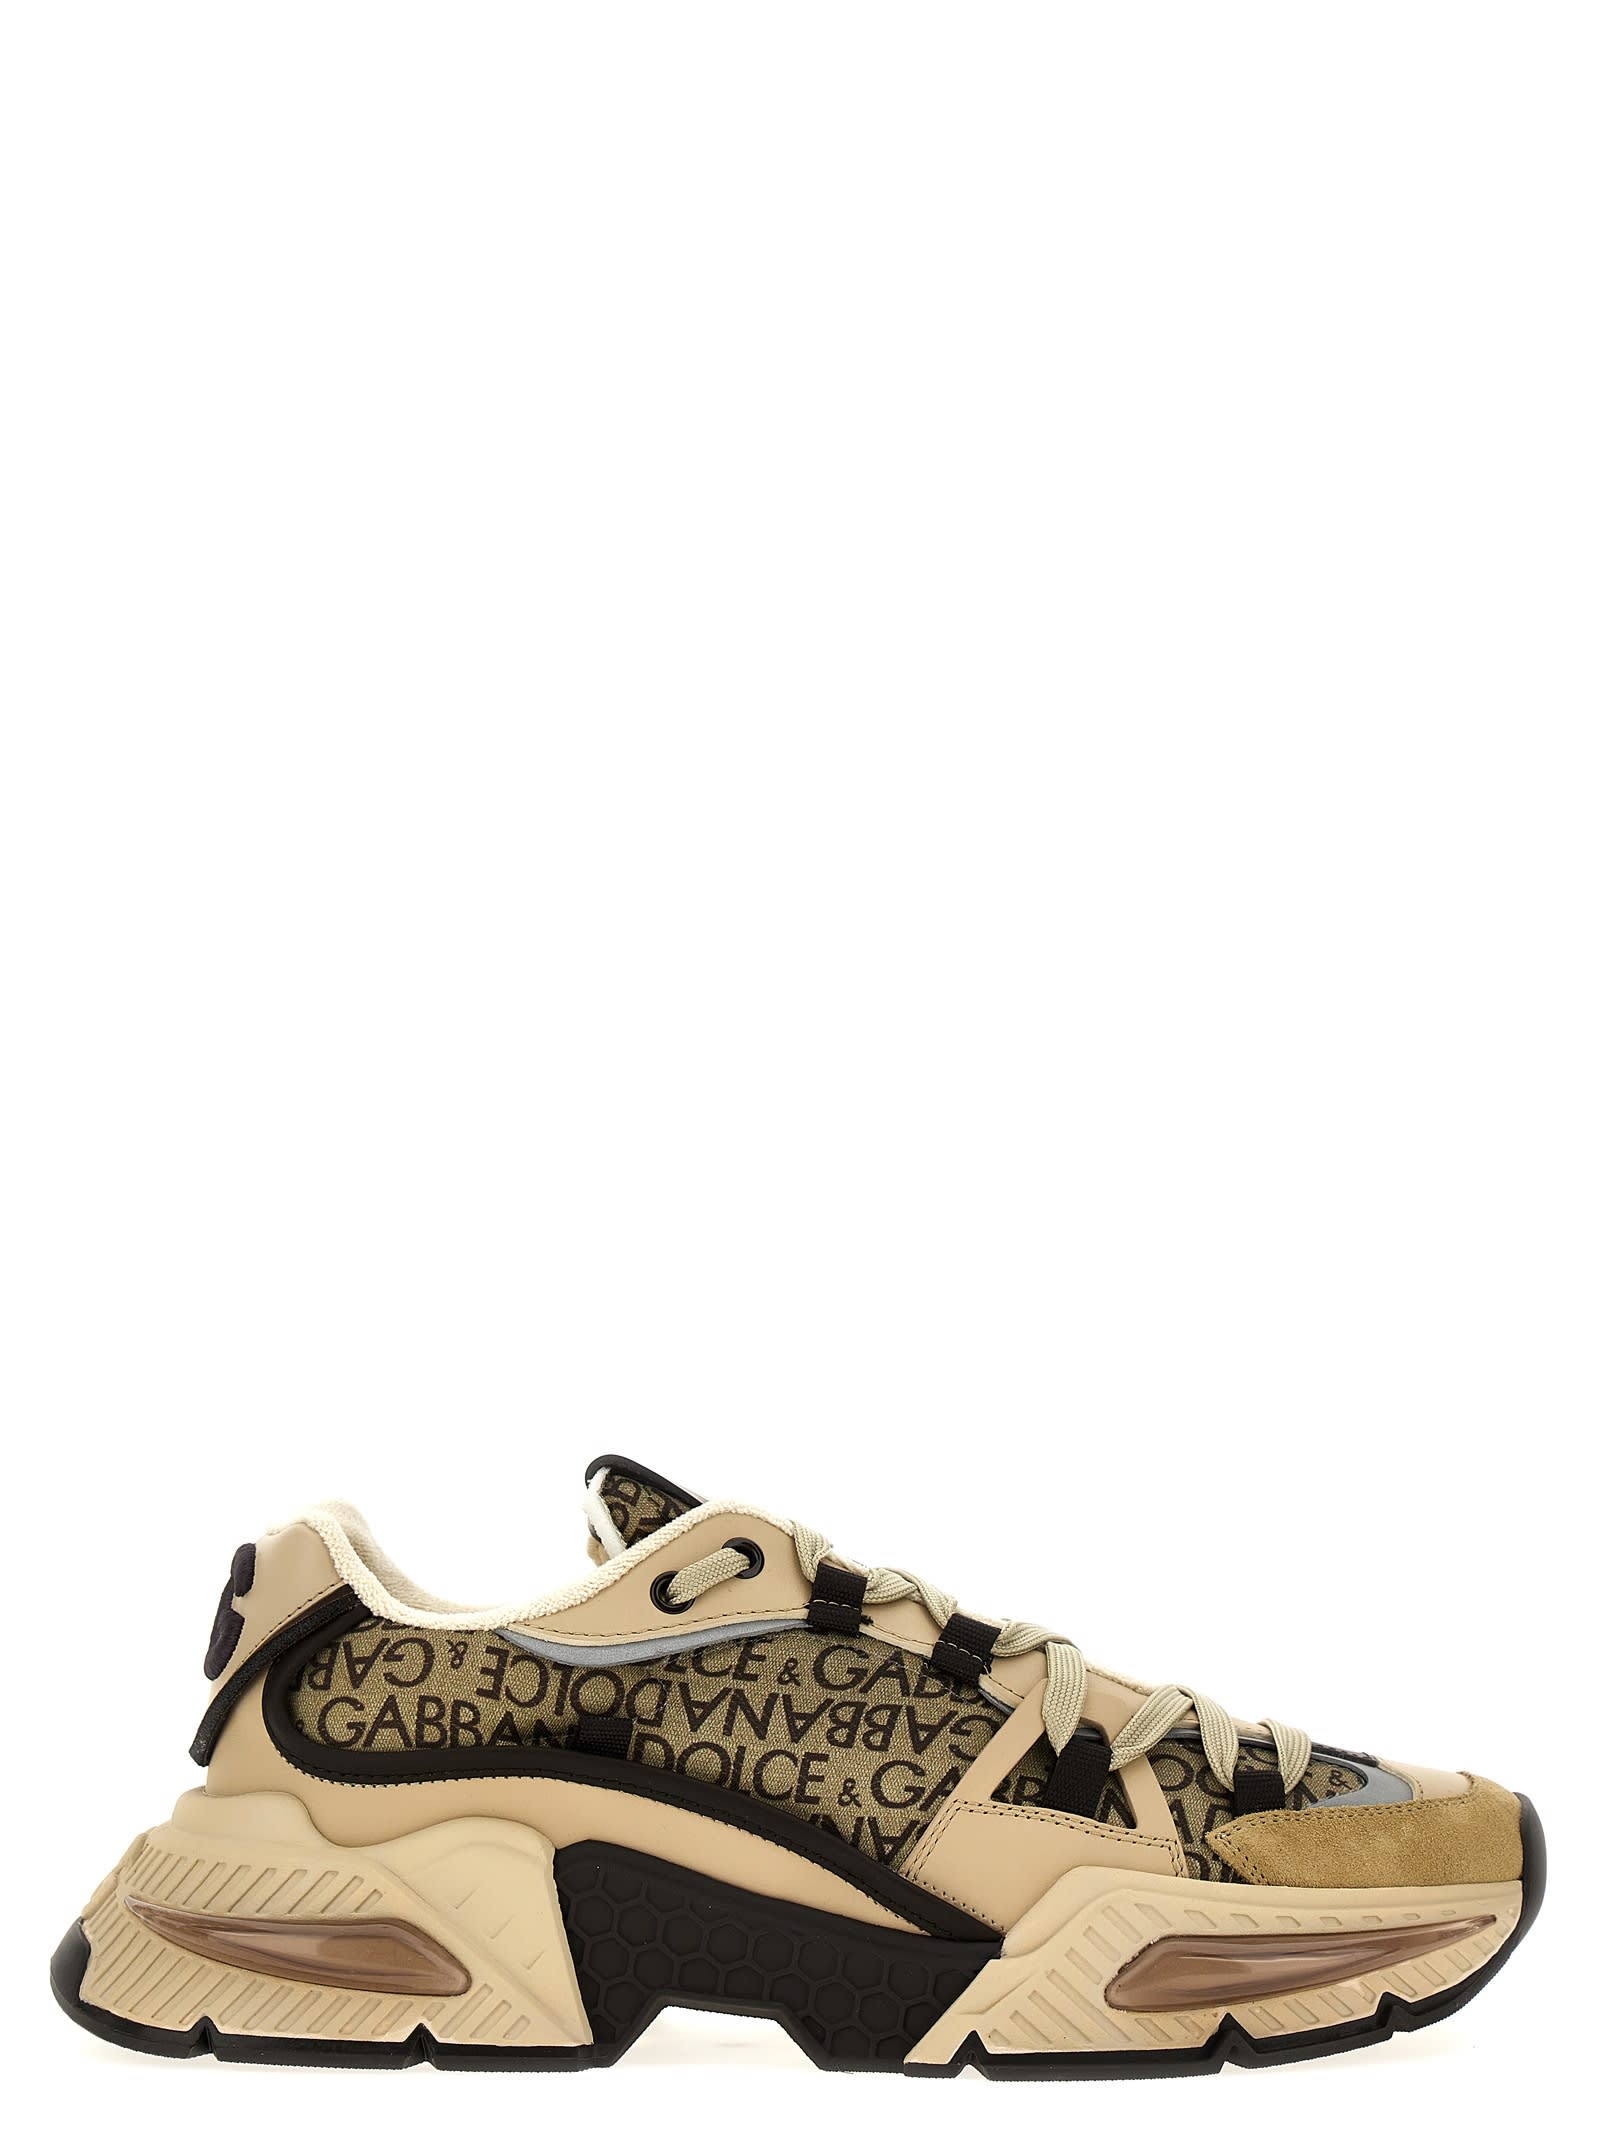 Dolce & Gabbana Airmaster Sneakers In Neutral